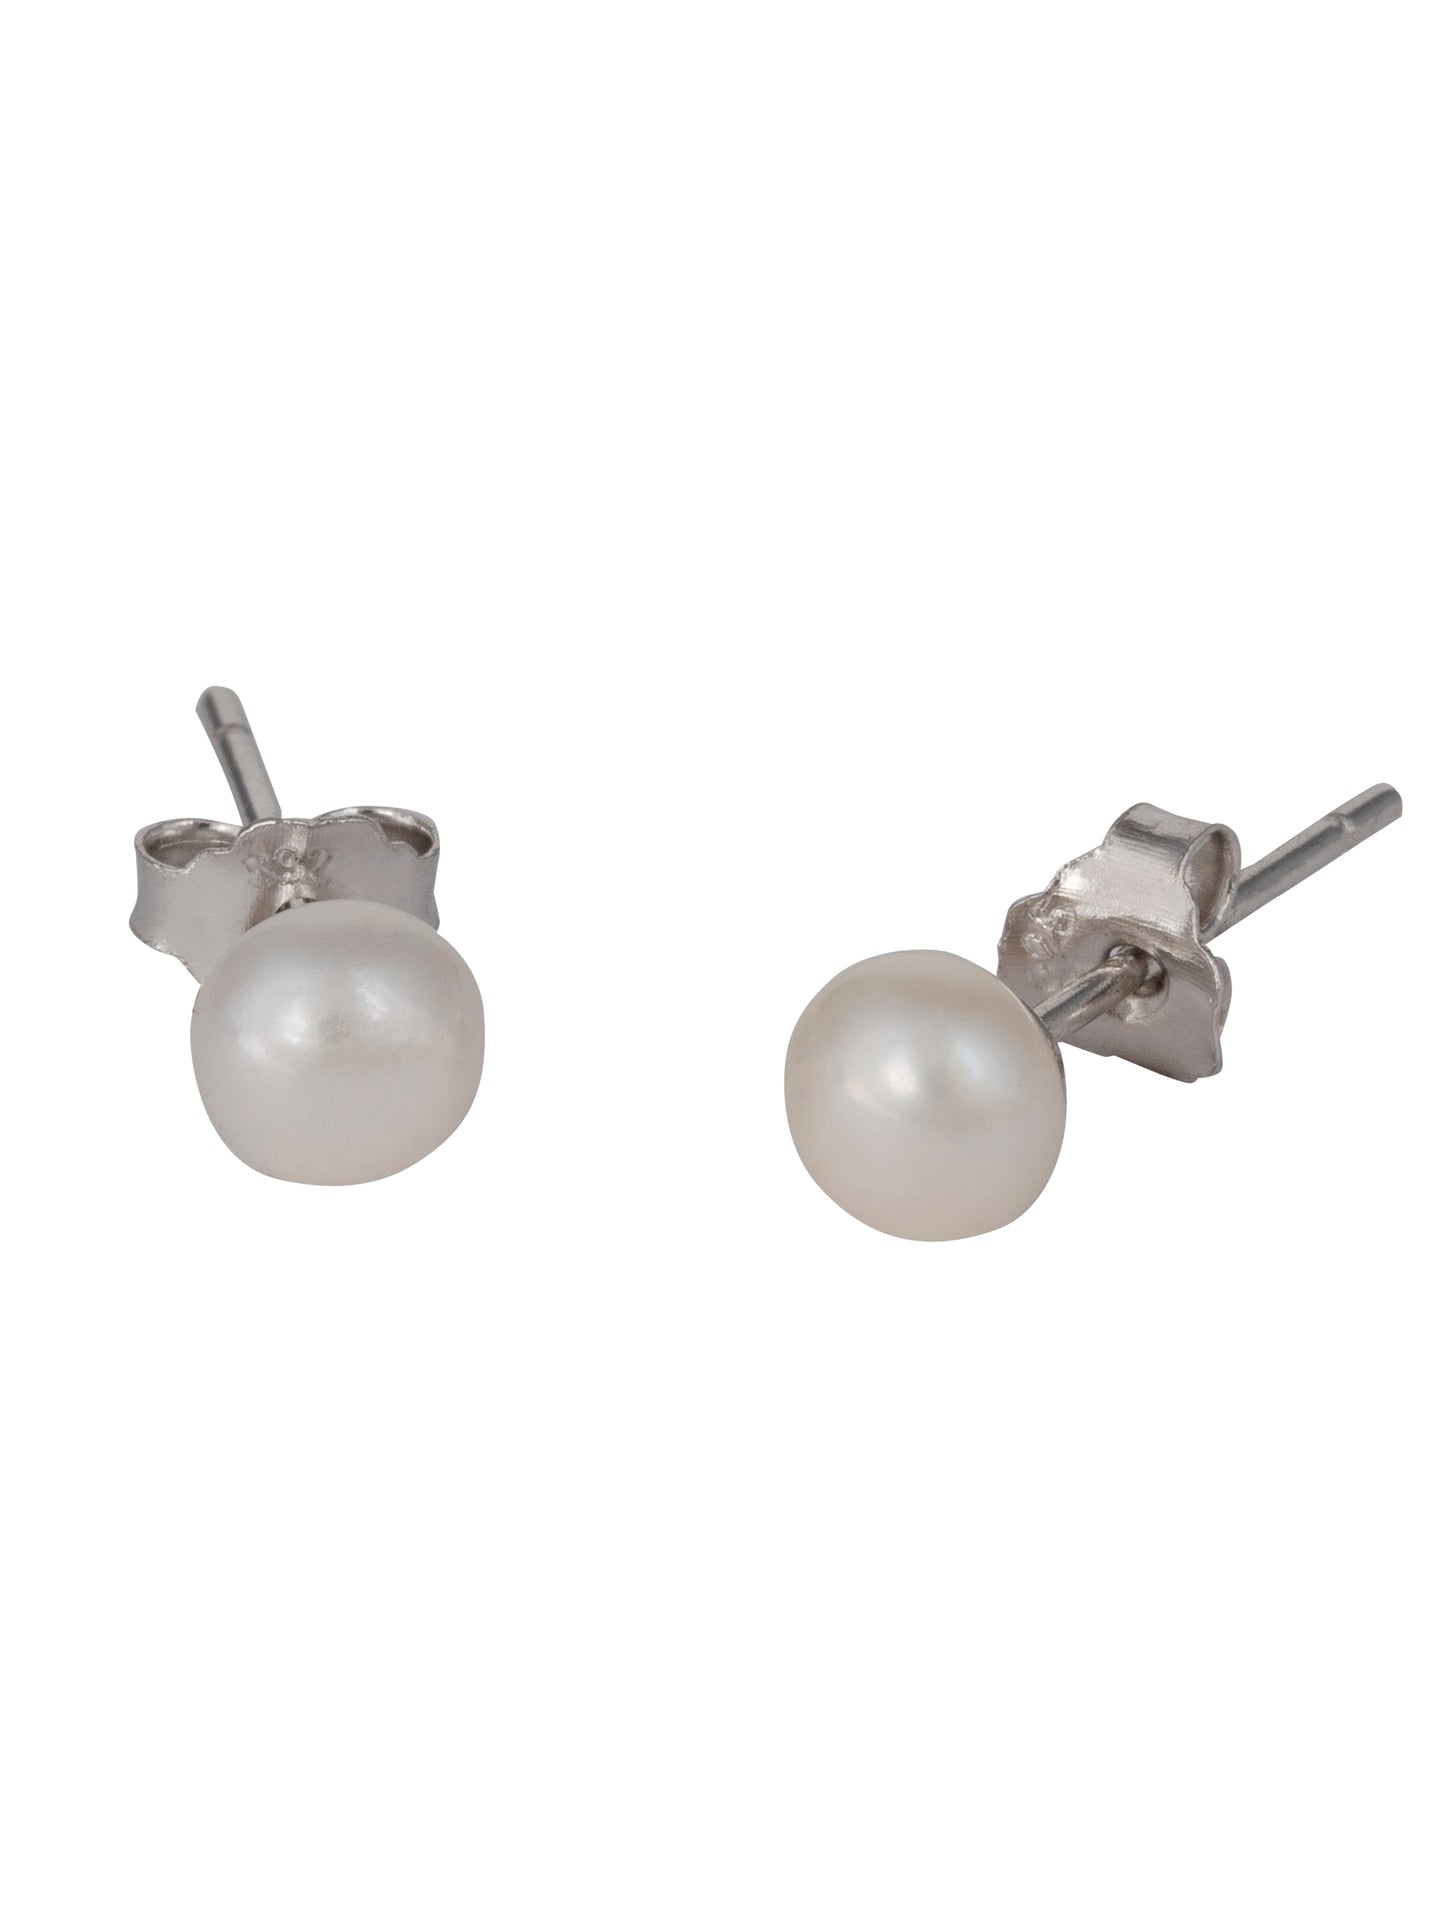 925 Sterling Silver Pearl Studs Combo 6mm and 4mm